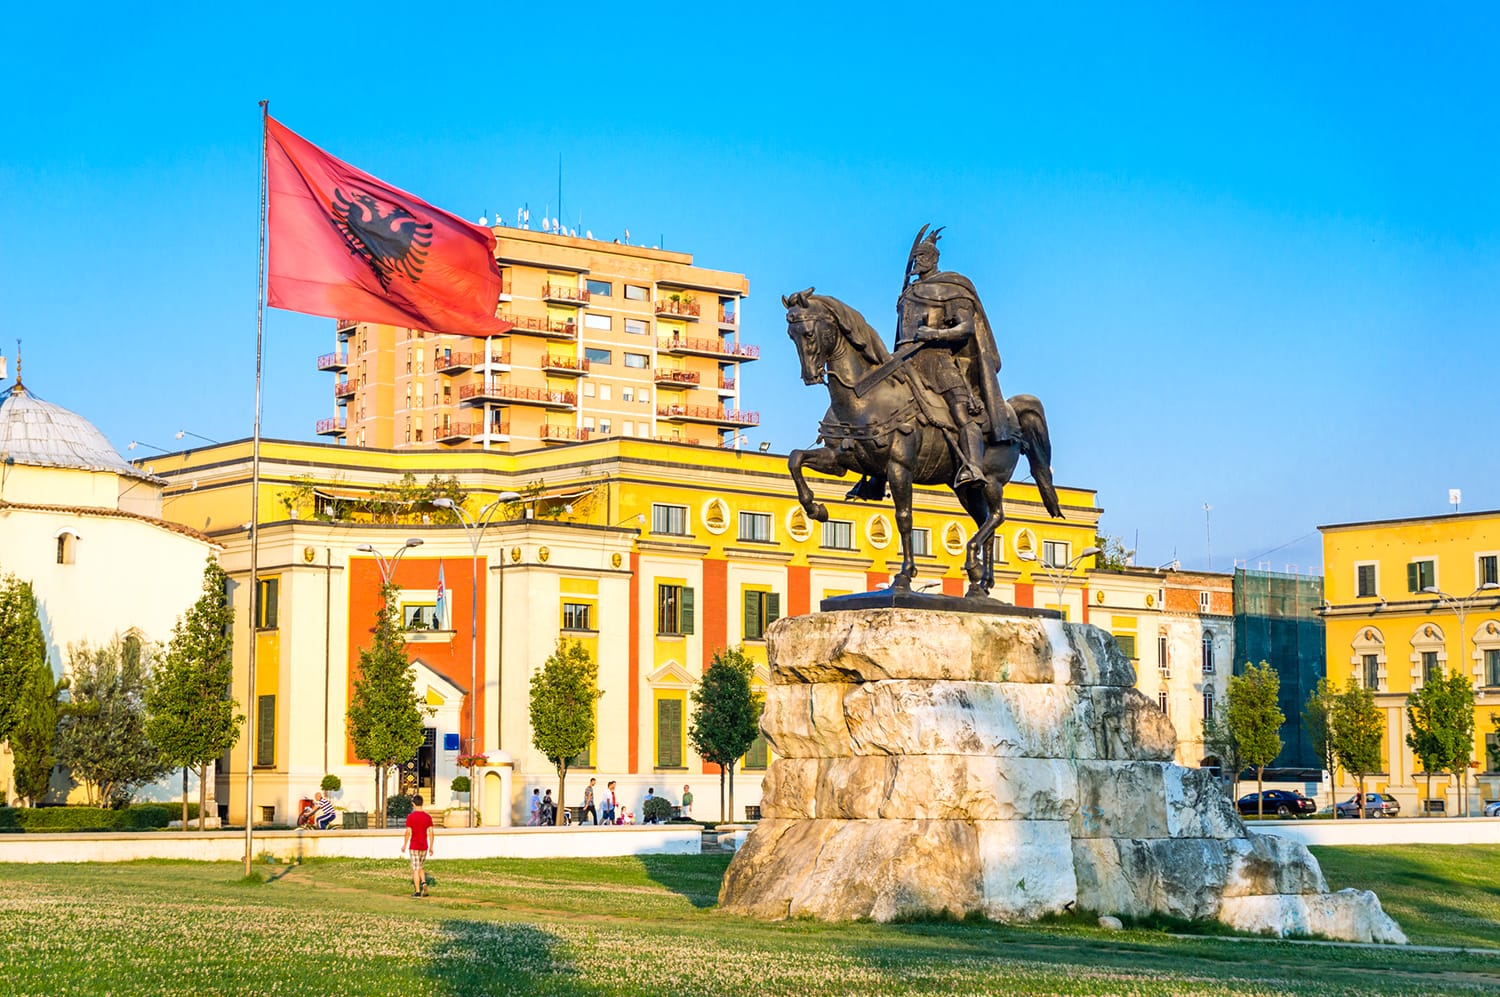 Skanderbeg square with flag, Skanderbeg monument and The Et'hem Bey Mosque in the center of Tirana city, Albania.